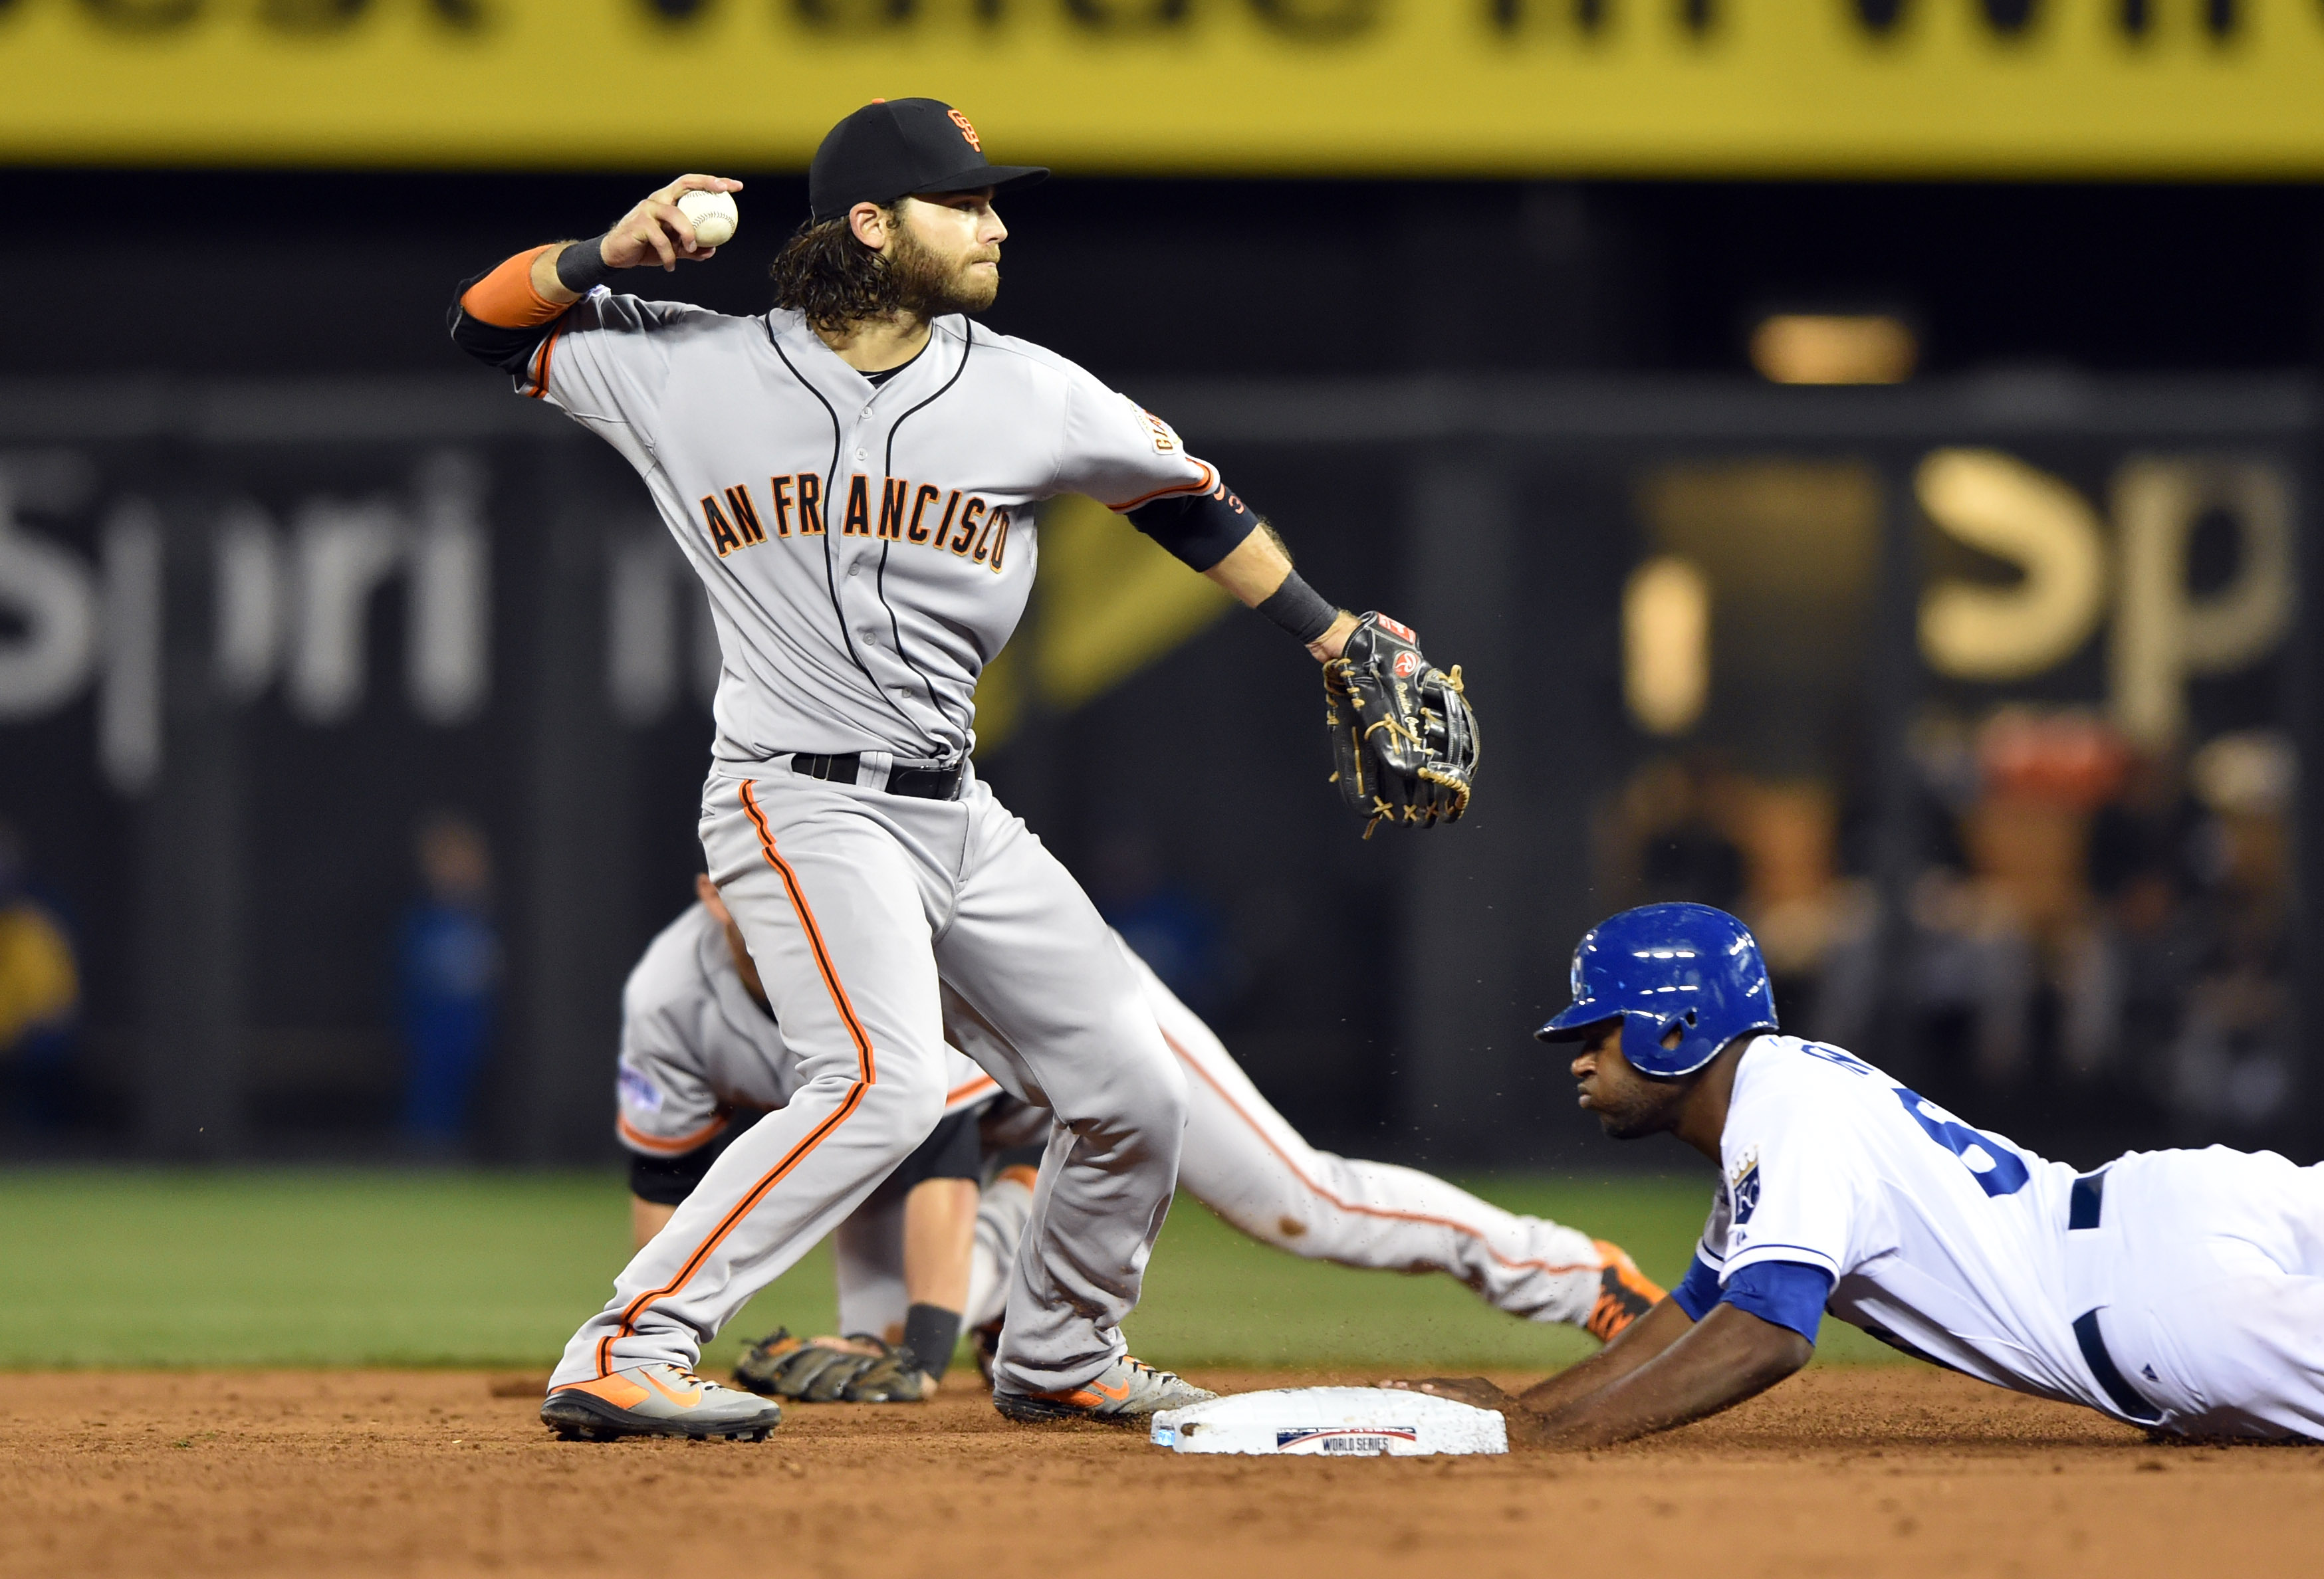 Giants shortstop Brandon Crawford turns a double play during the 2014 World Series. (USA TODAY Sports Images)